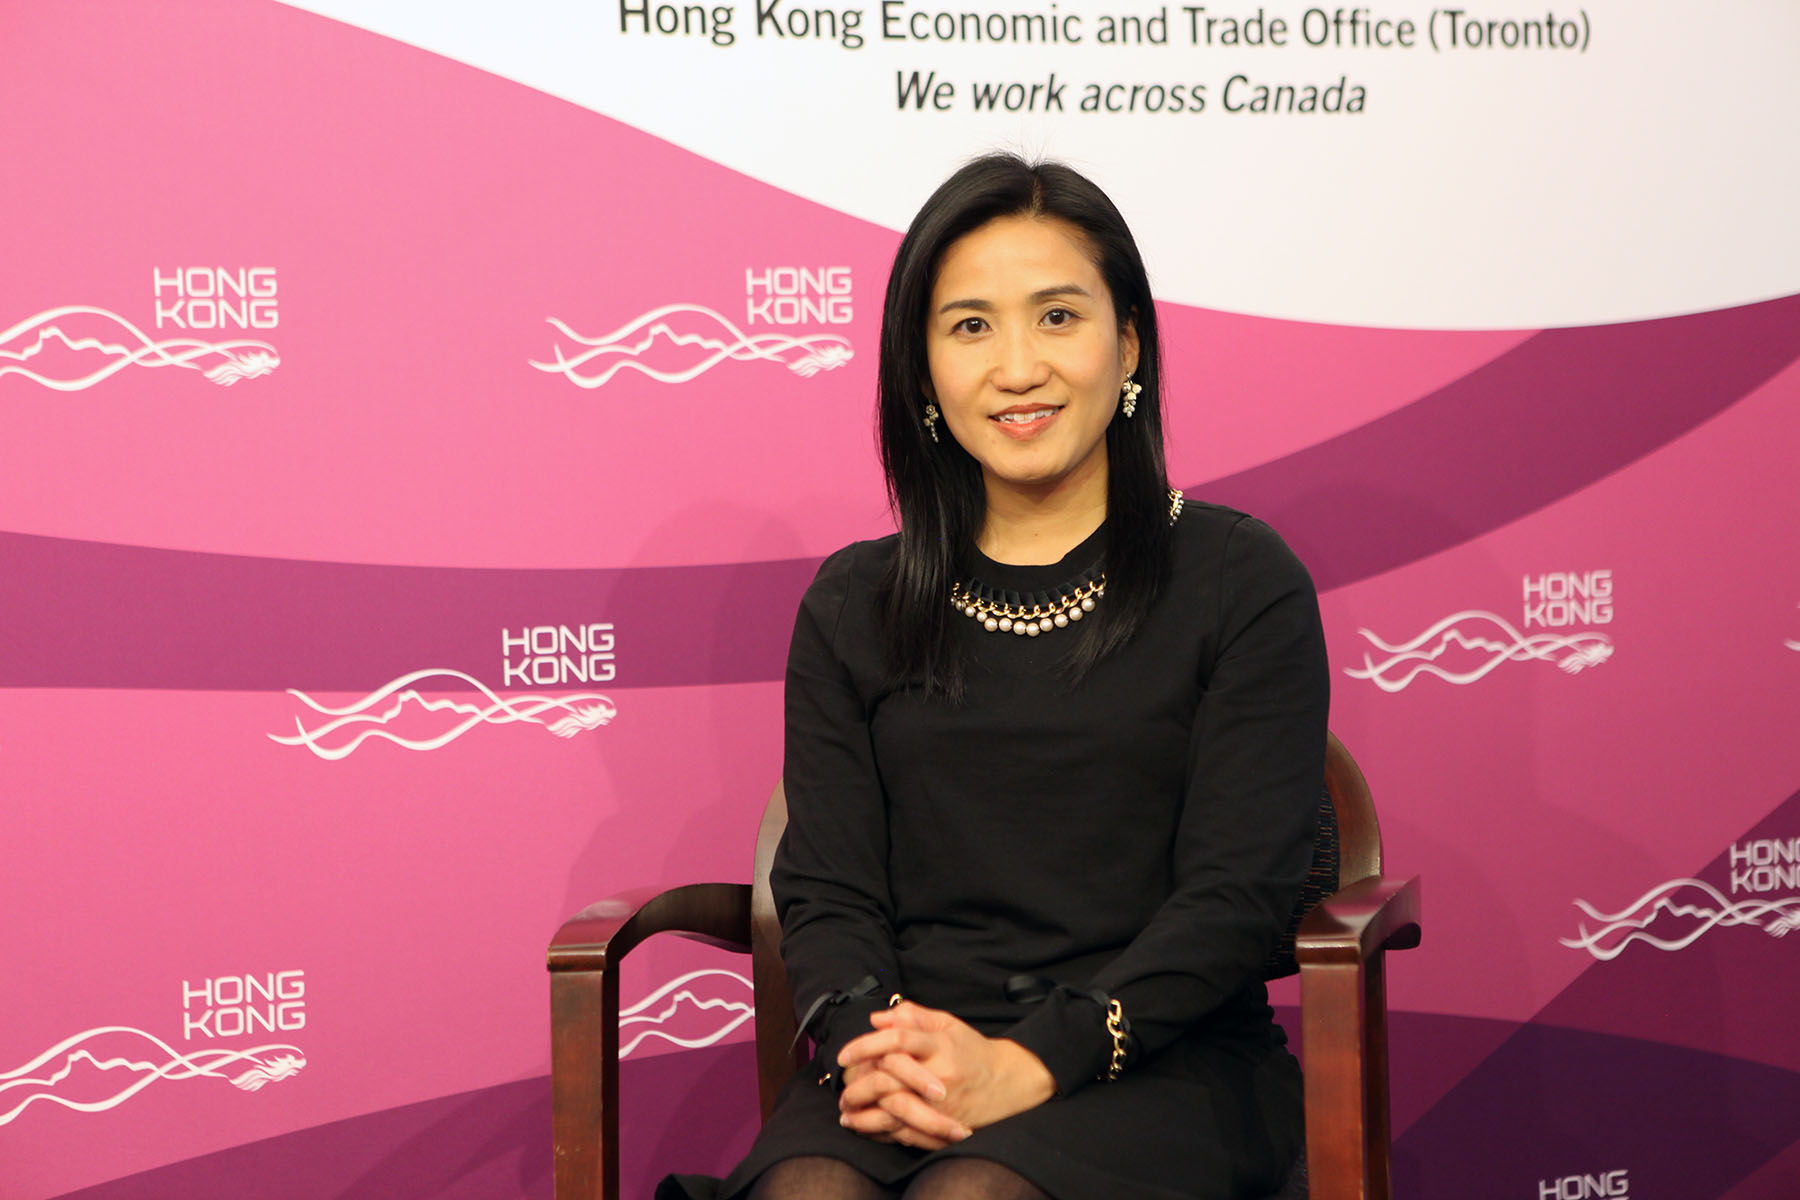 Director of the Hong Kong Economic and Trade Office (Toronto), Ms Emily Mo, joined the "HKJU Carnival 2021" hosted by Hong Kong Joint Universities Alumni (Ontario) (HKJU) held virtually on November 7 to share the fun with members of alumni from different Hong Kong universities.